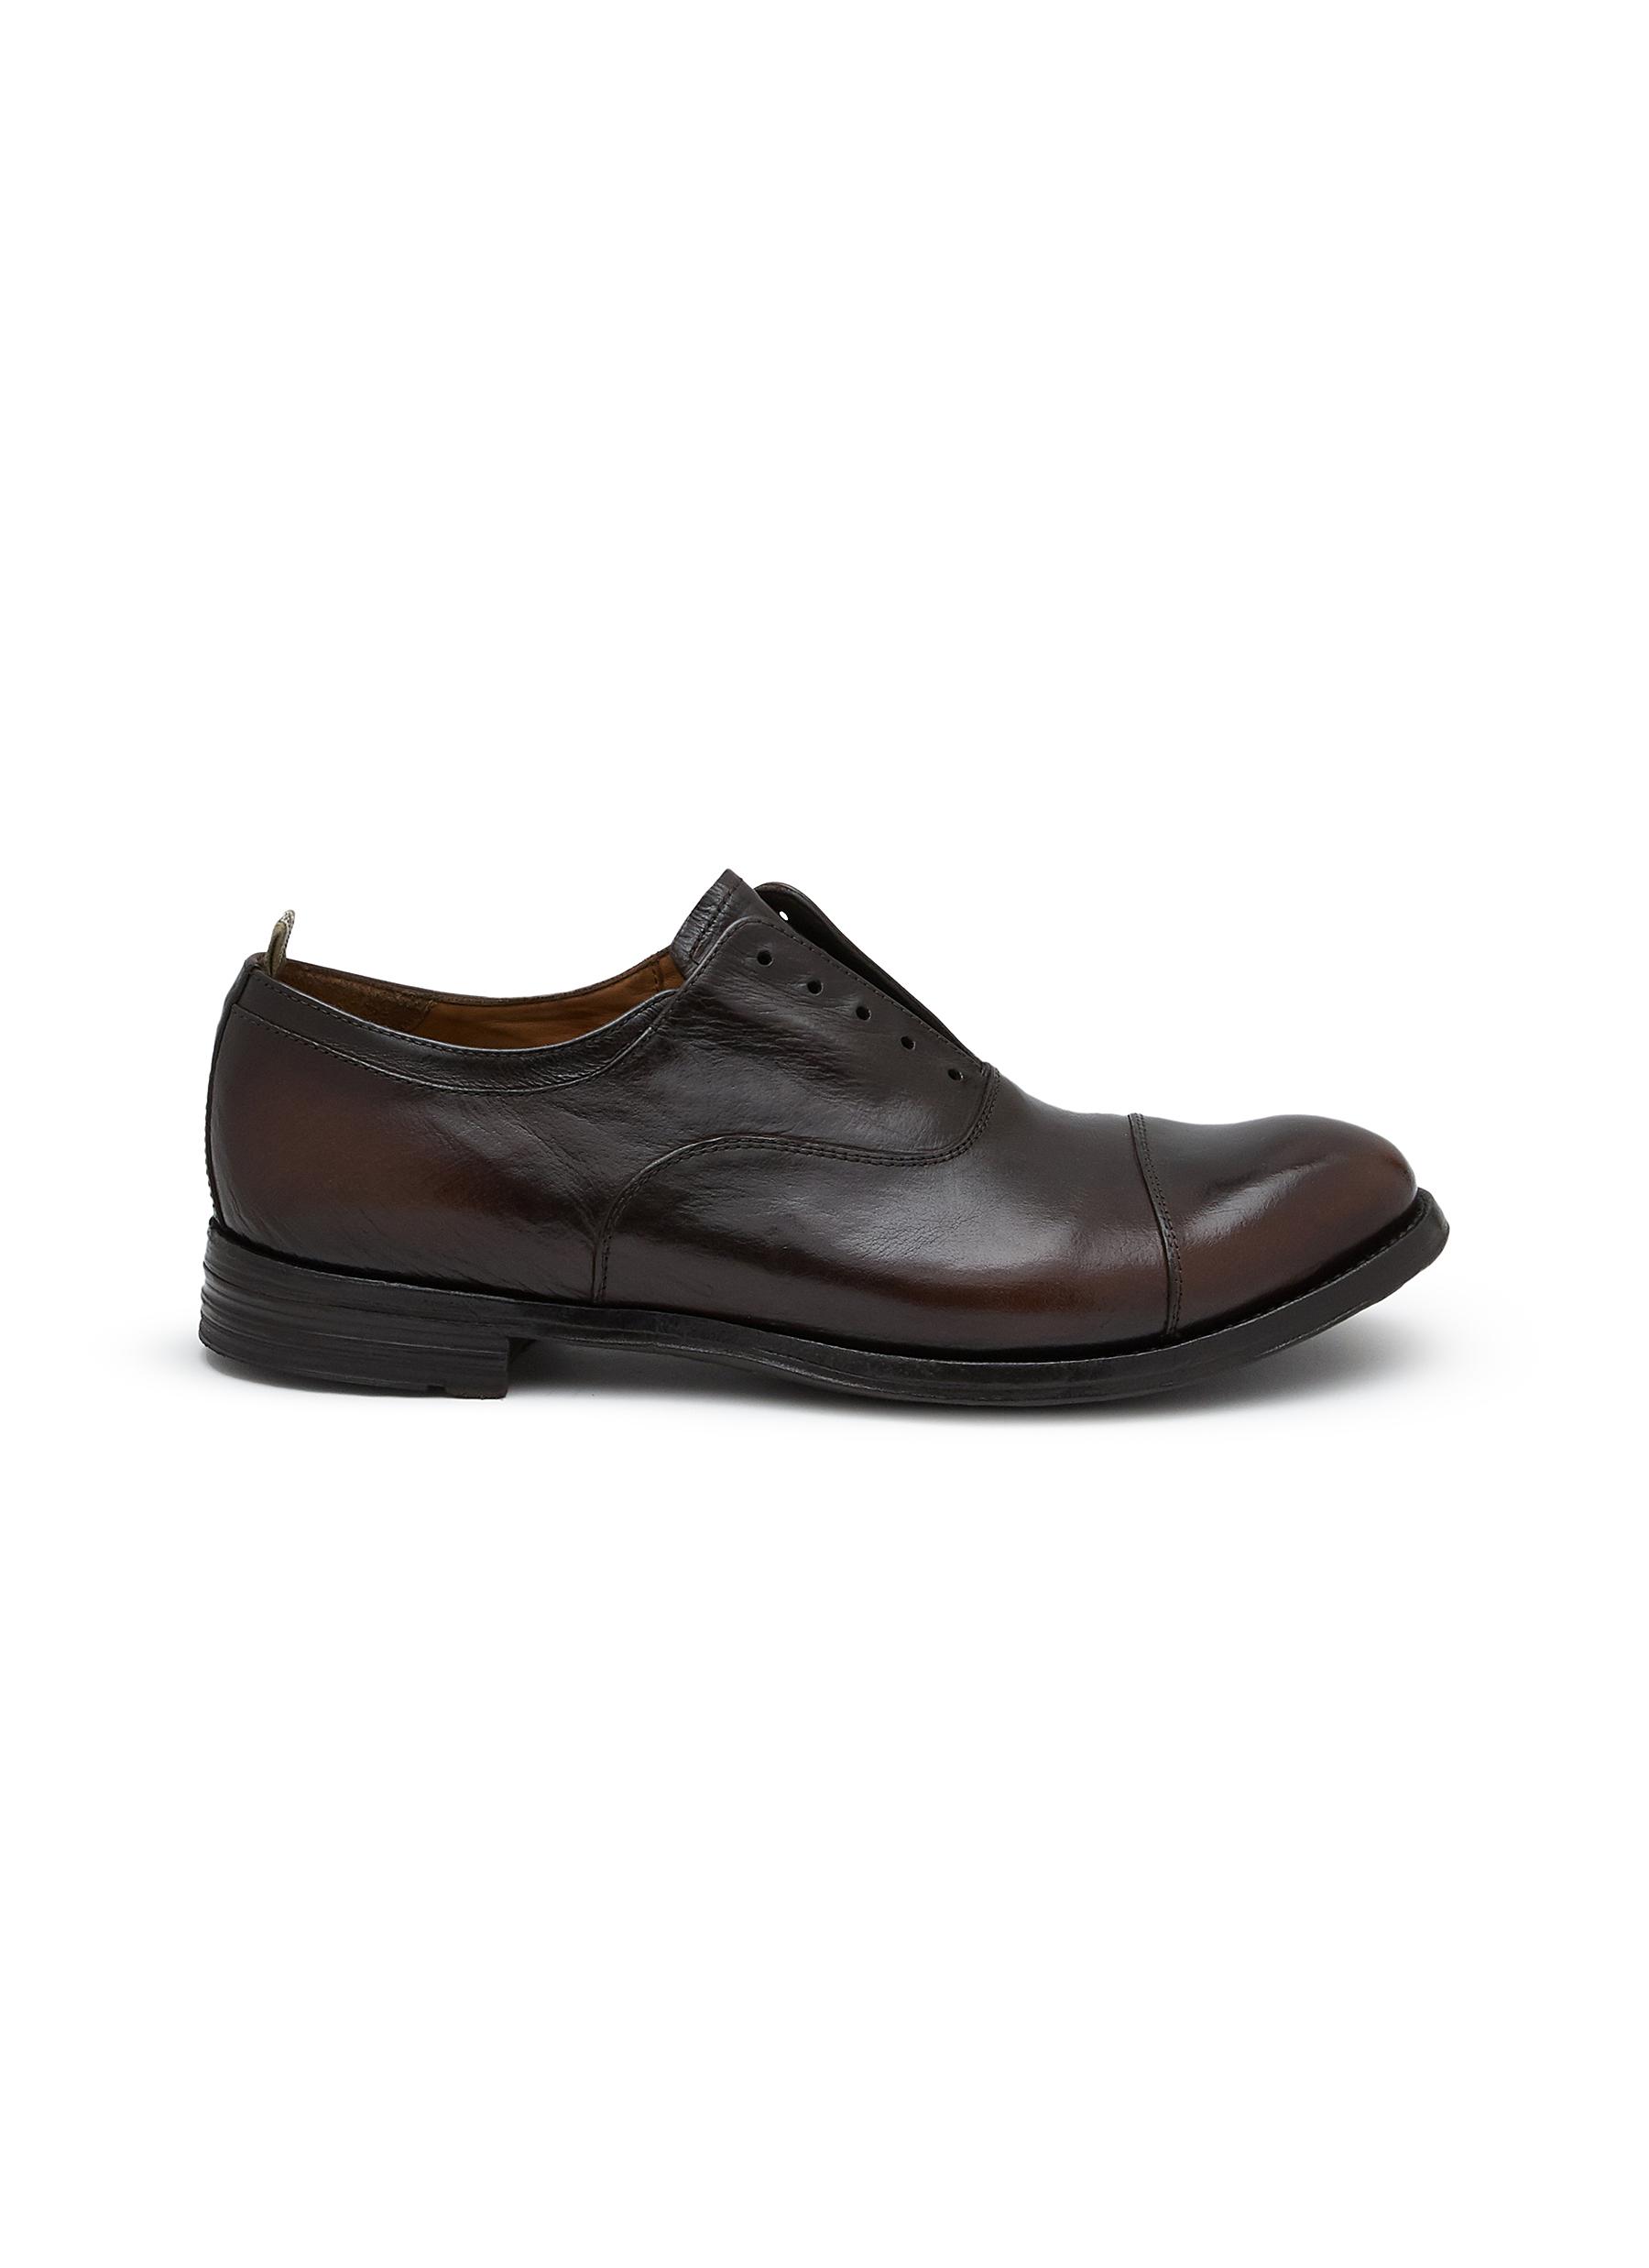 Anatomia 15 Leather Oxford Shoes